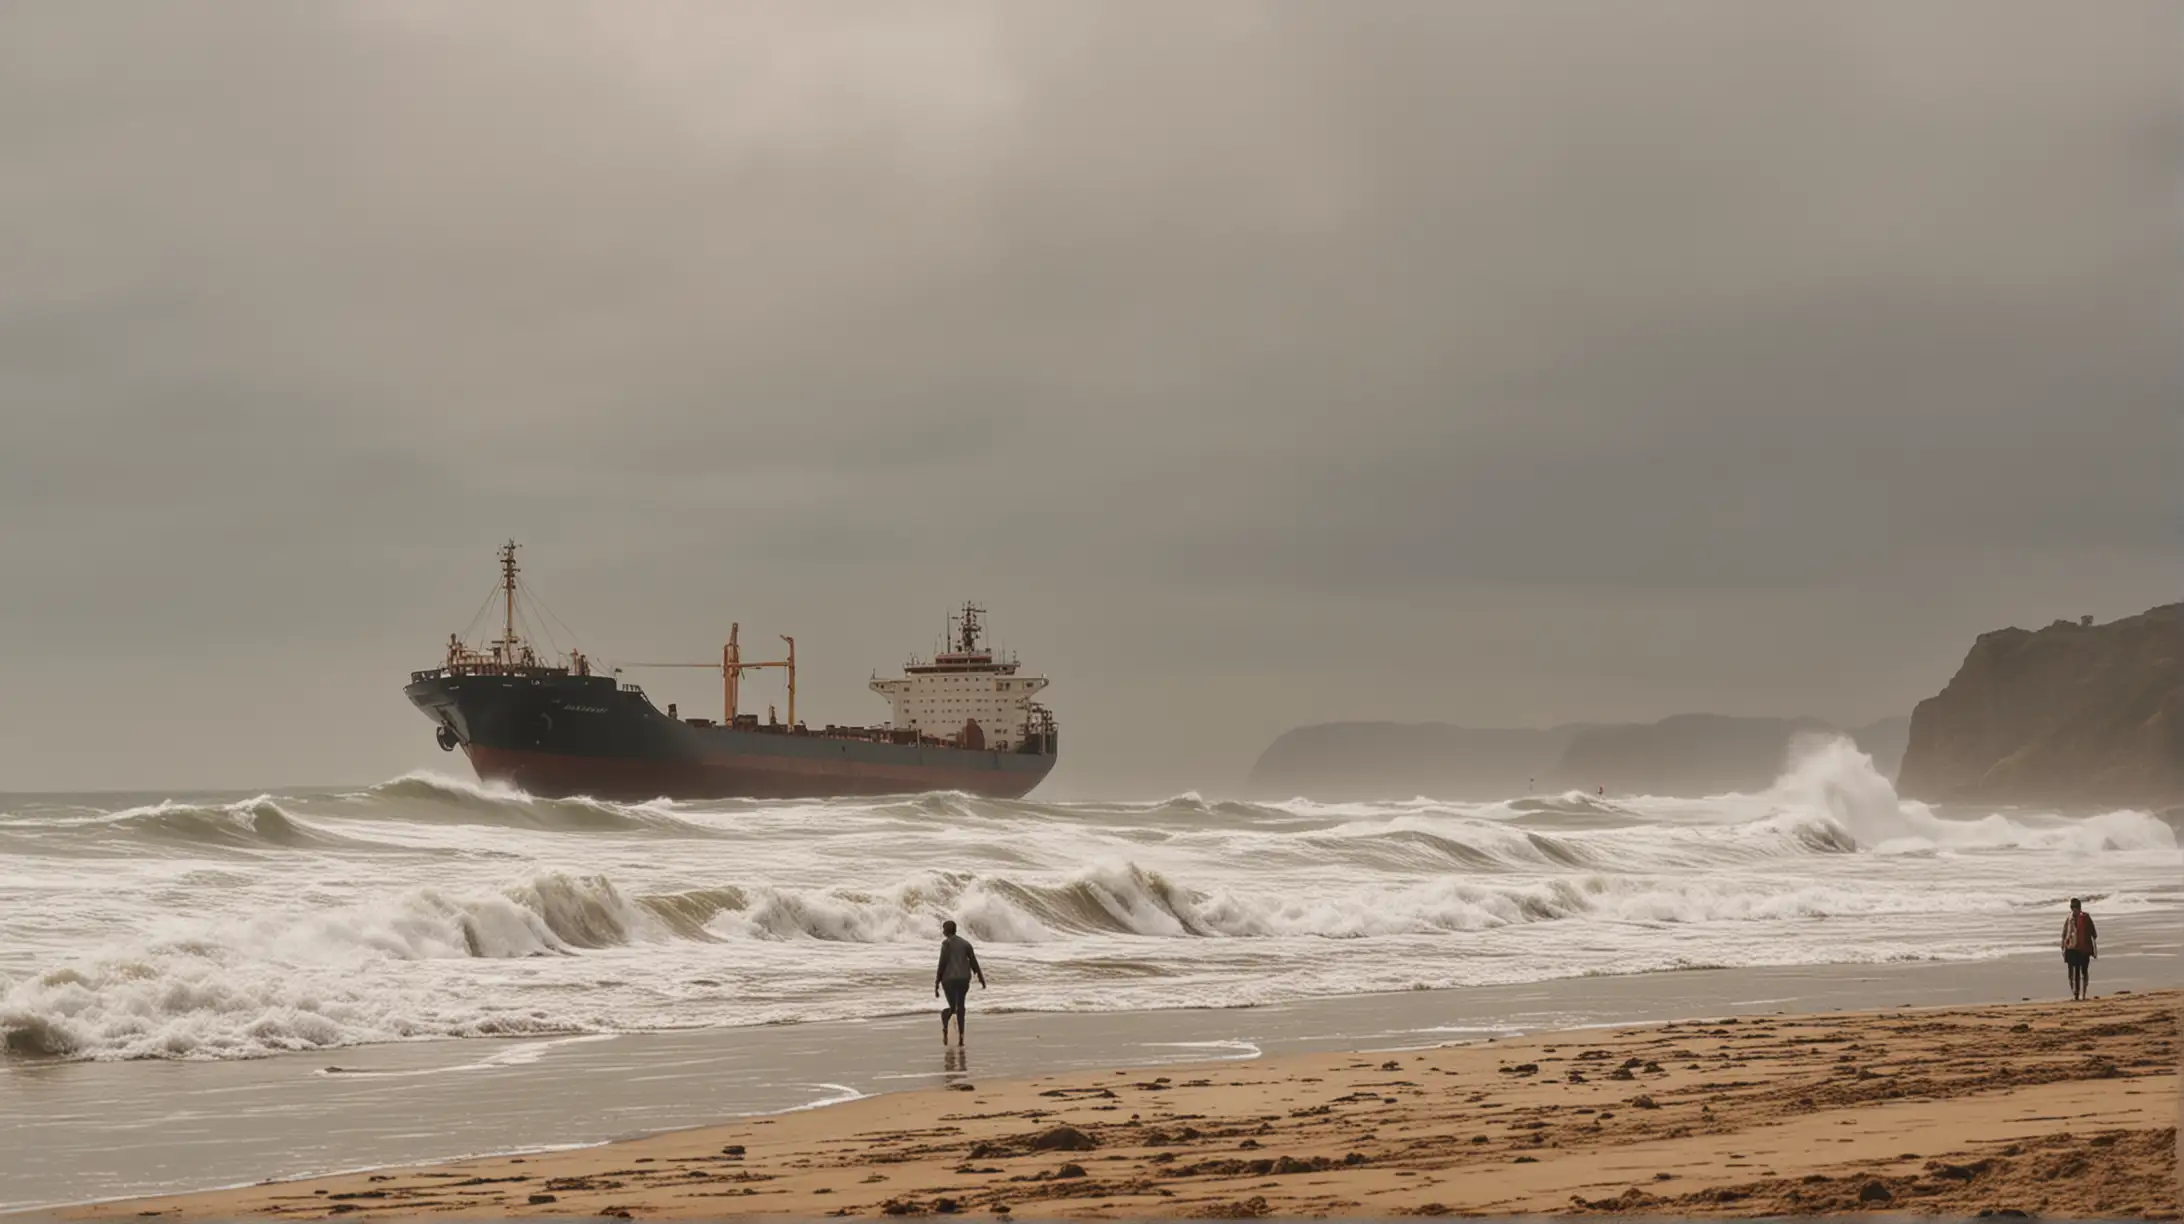 People Walking on Sandy Beach with Distant Cargo Ship and Big Waves